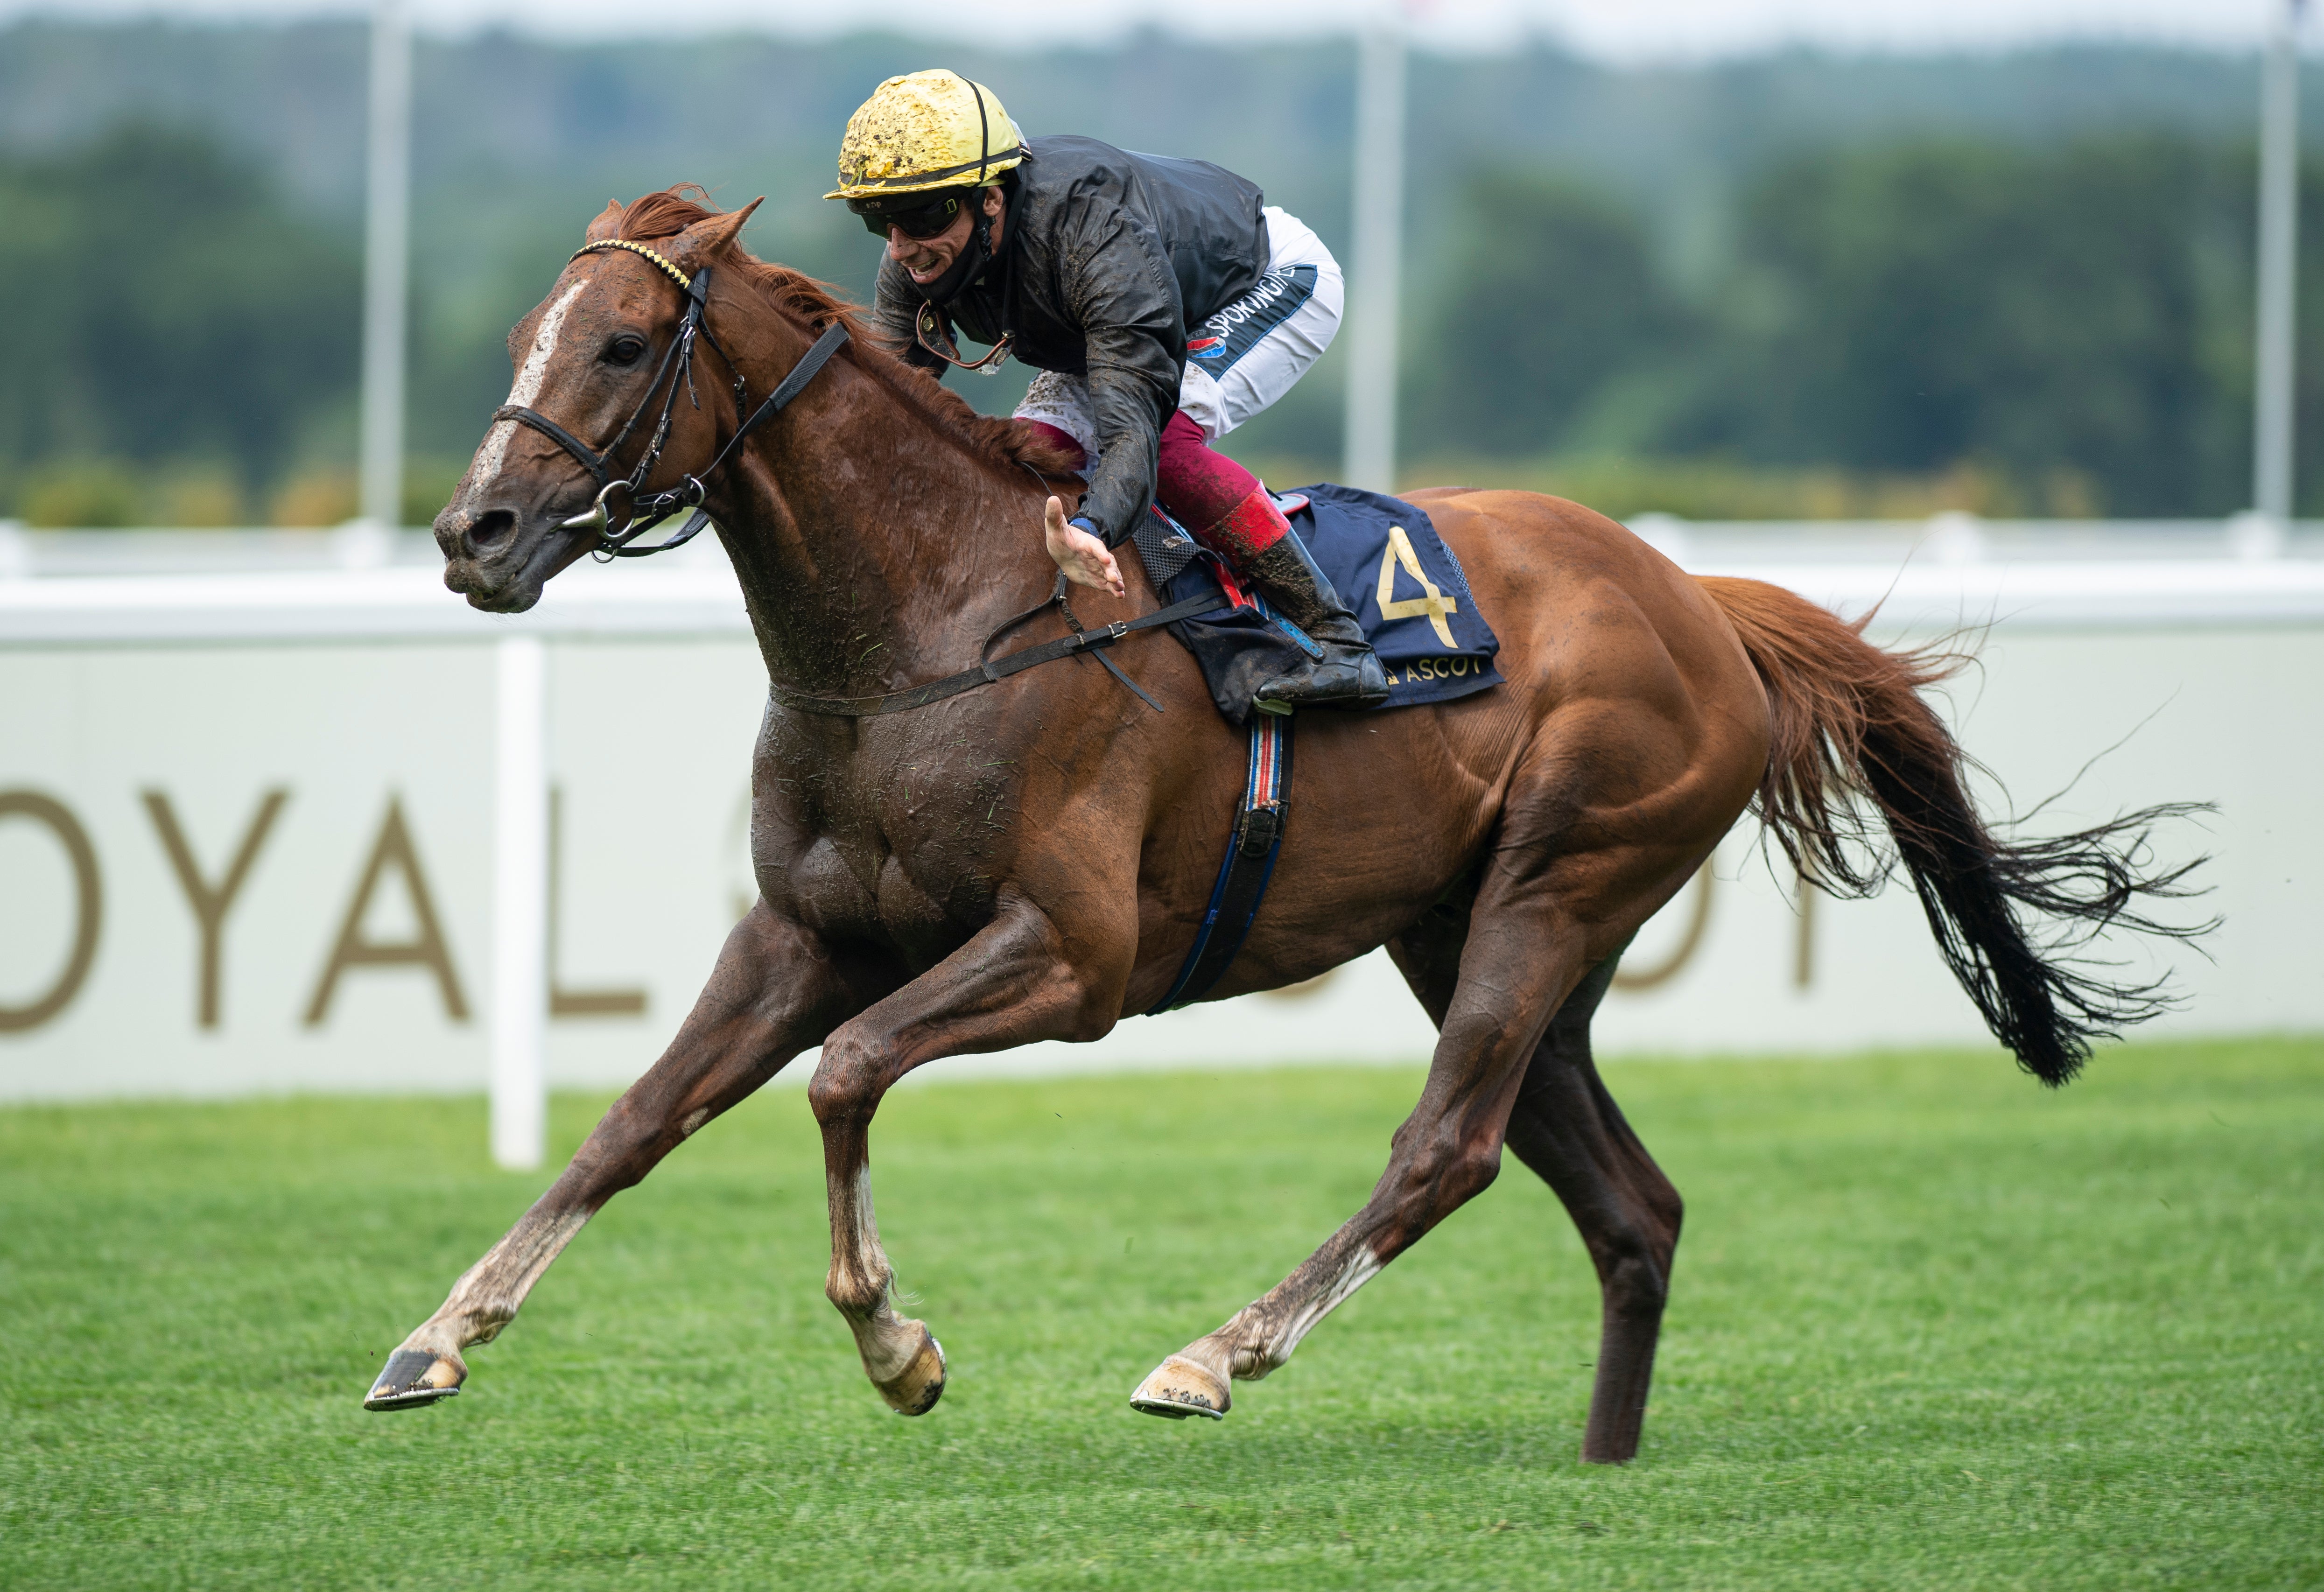 Stradivarius will bid to win a record-equalling fourth Gold Cup at Royal Ascot on Thursday